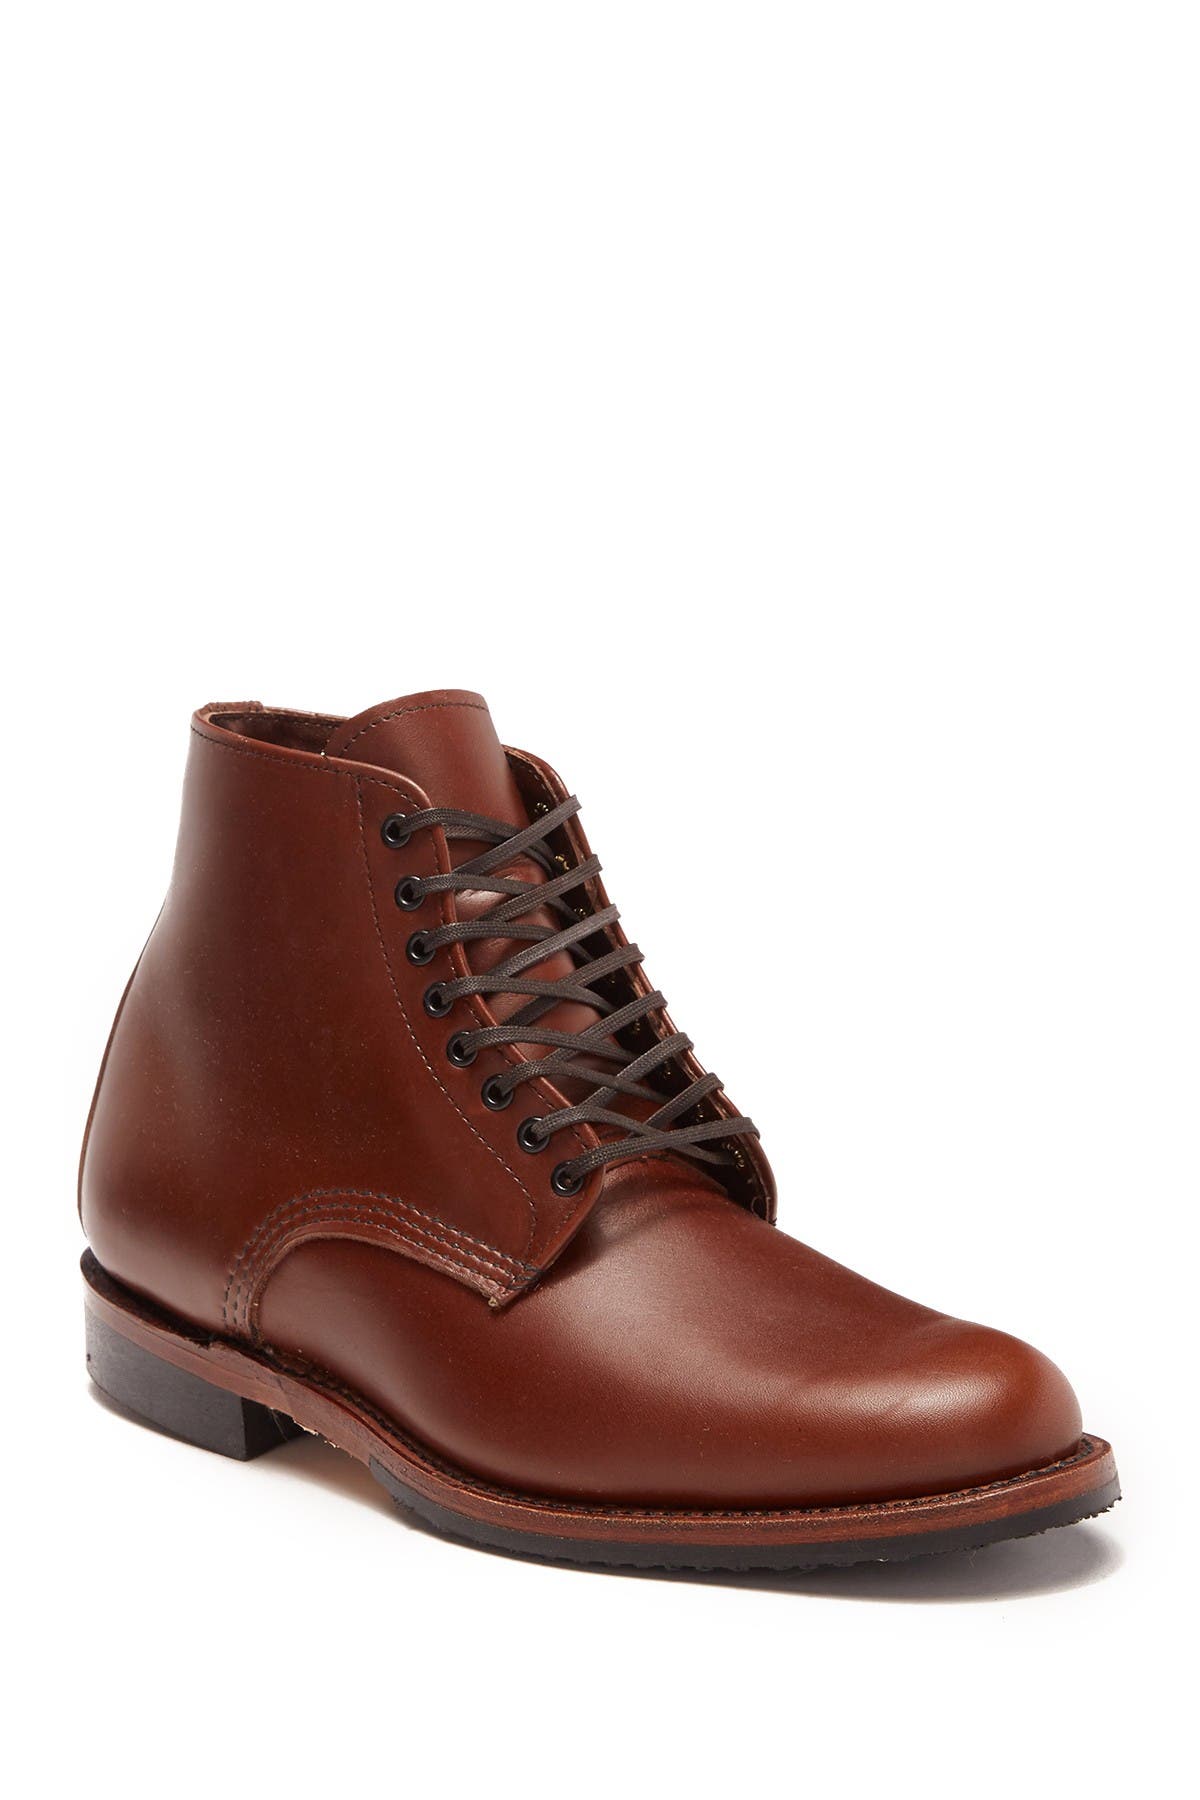 red wing williston boot